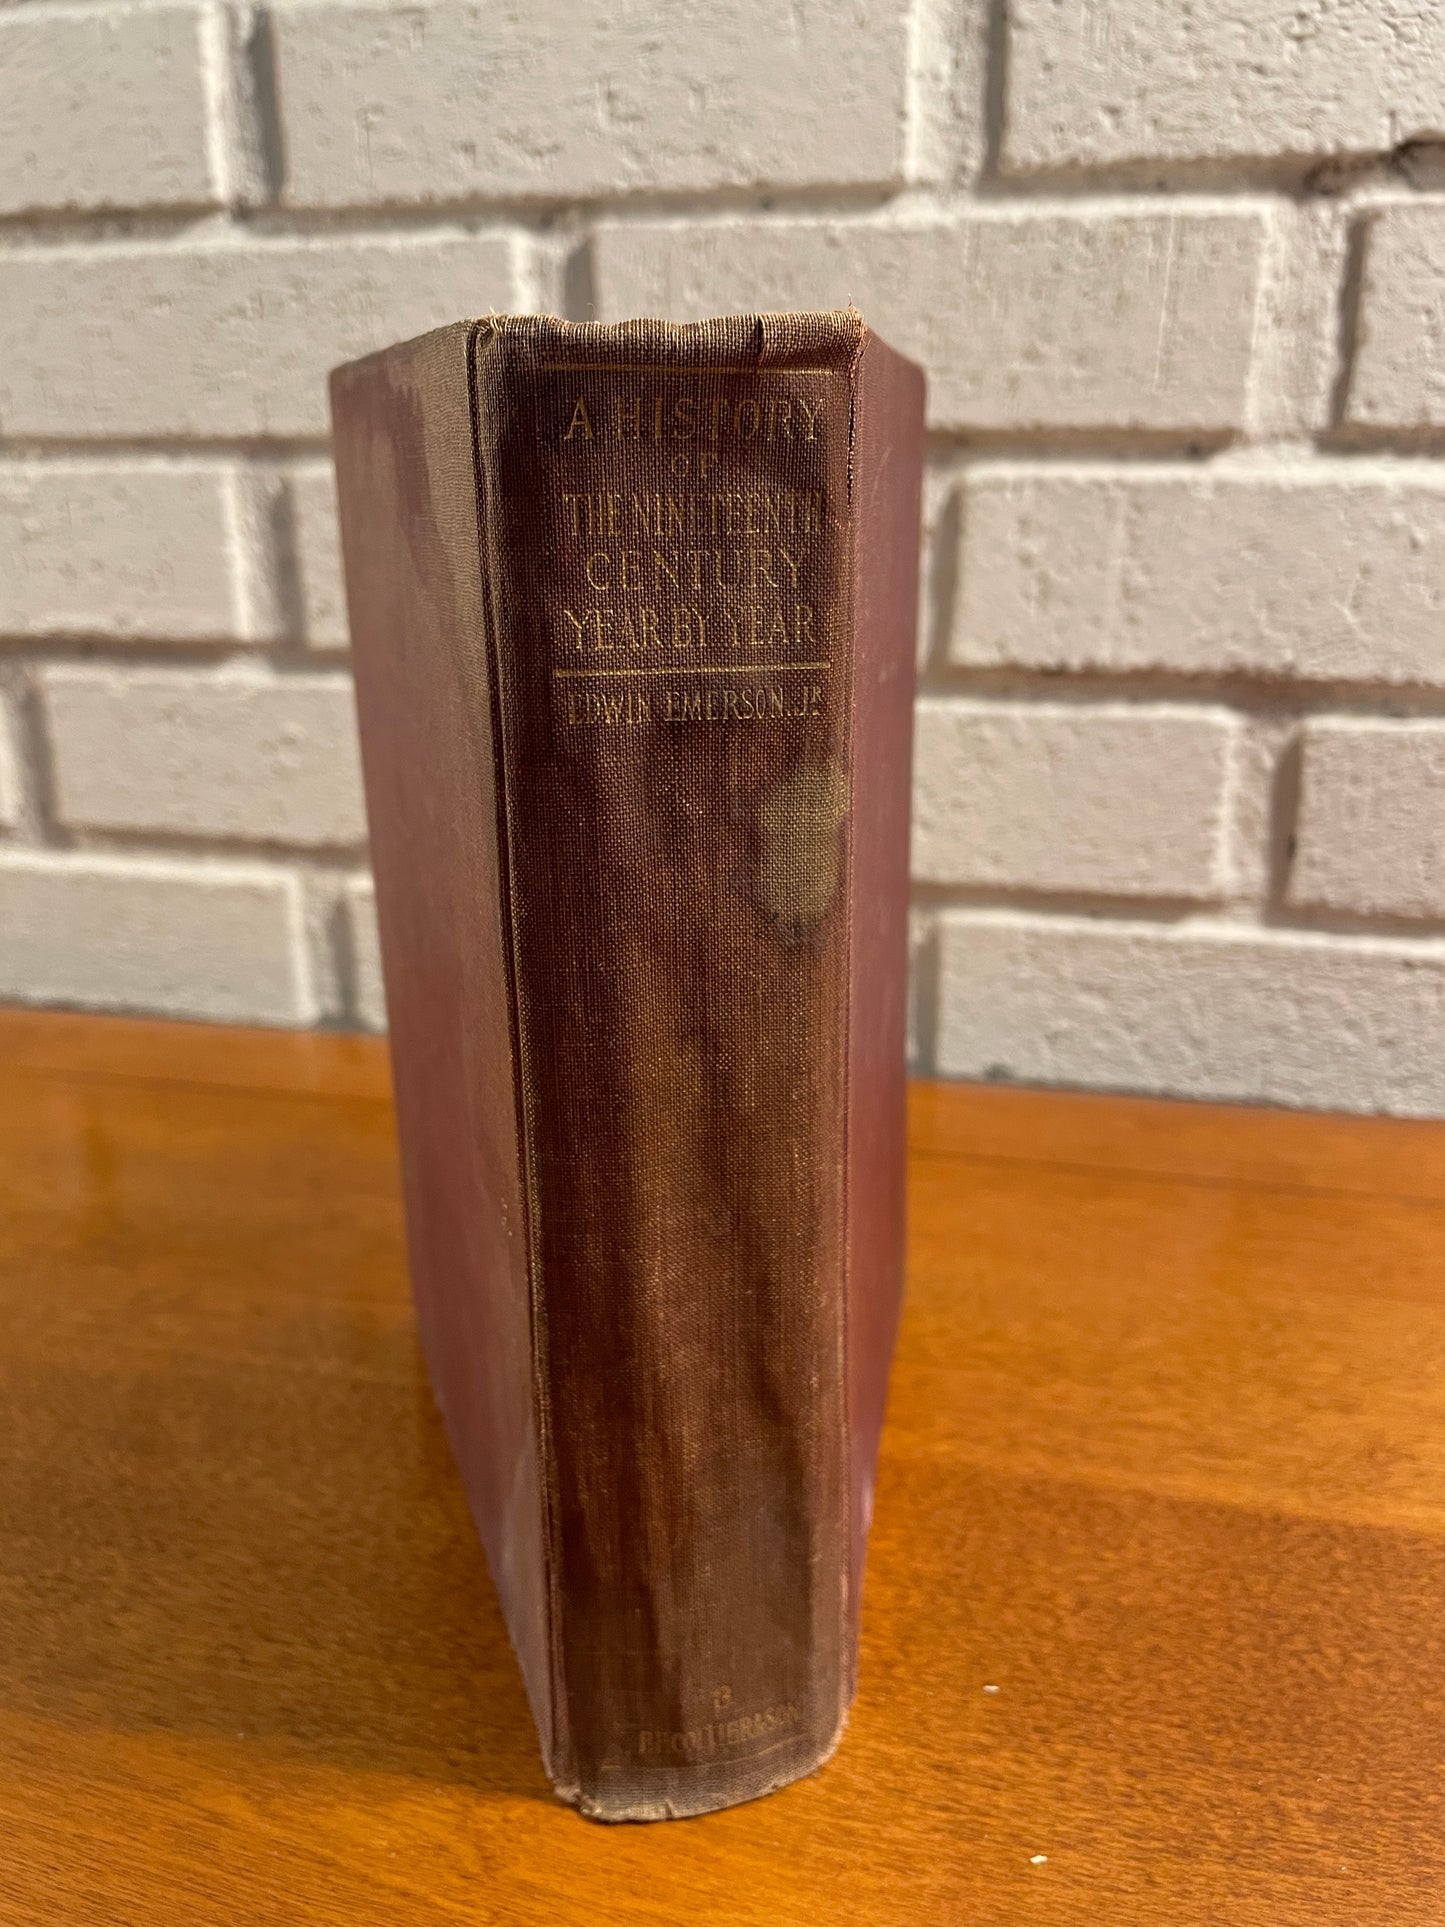 A History of The Nineteenth Century Year by Year Edwin Emerson, 1902 Volume 3